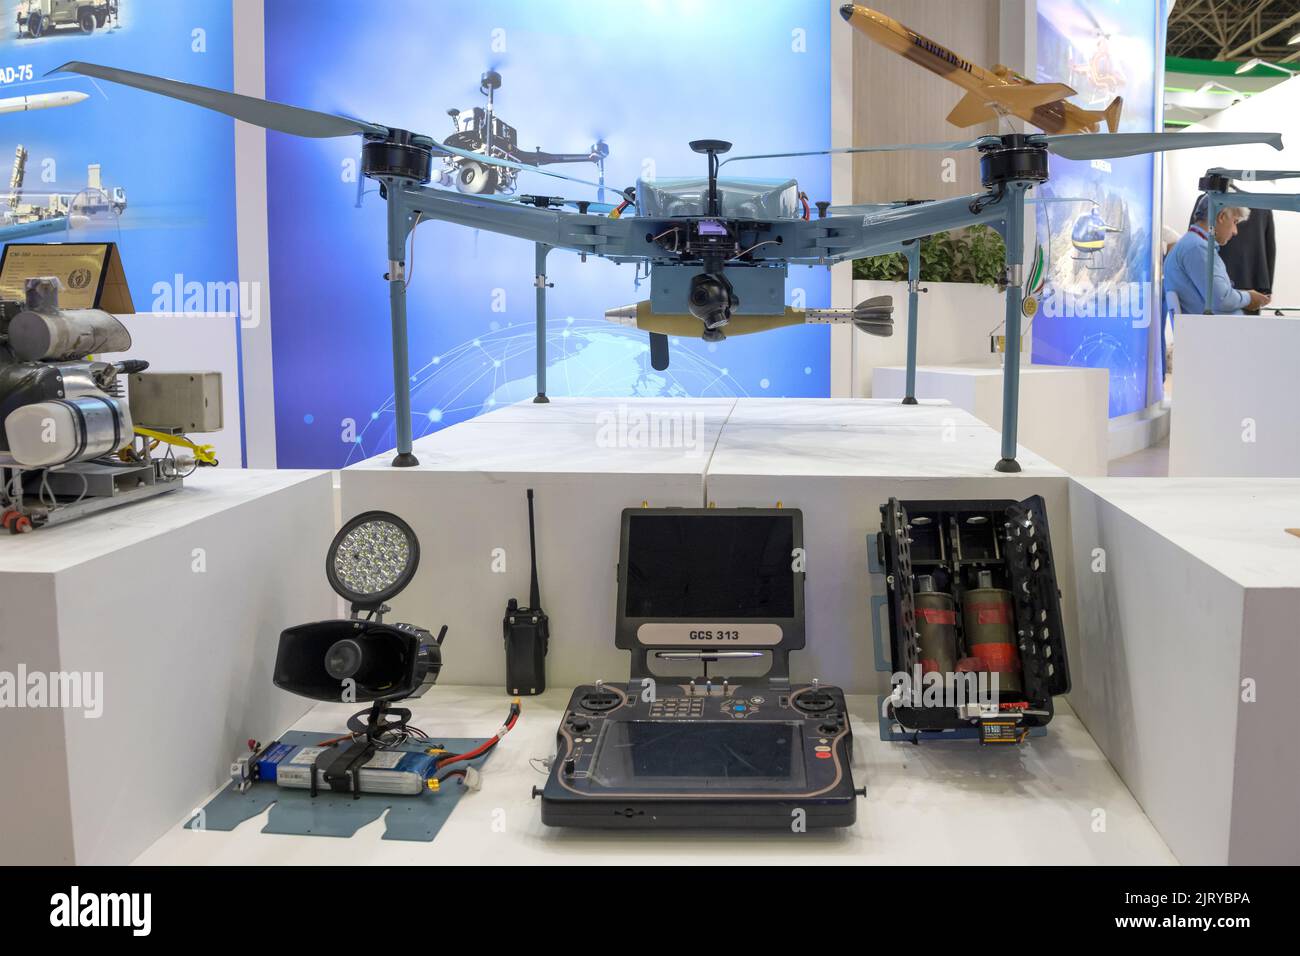 MOSCOW REGION, RUSSIA - AUGUST 19, 2022: Iranian quadrocopter in the exposition of the international military-technical forum 'Army-2022' Stock Photo